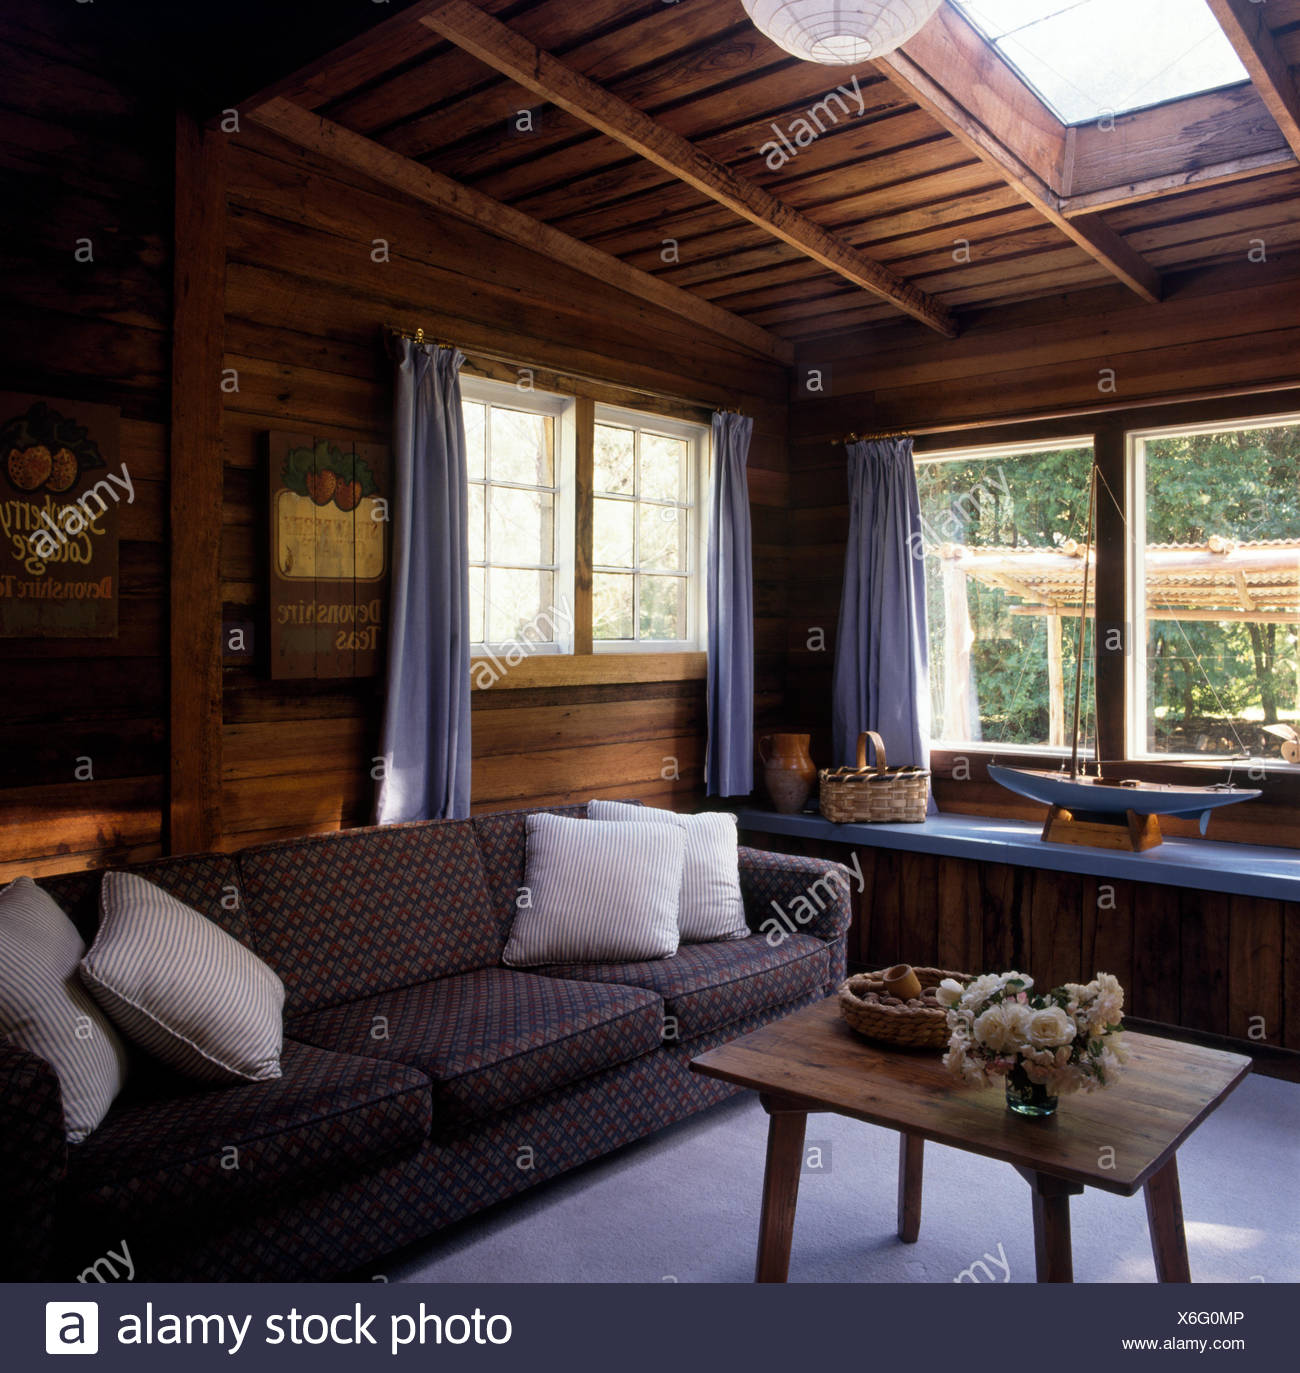 Wood Paneled Ceiling And Walls In Living Room With A Rustic Wooden